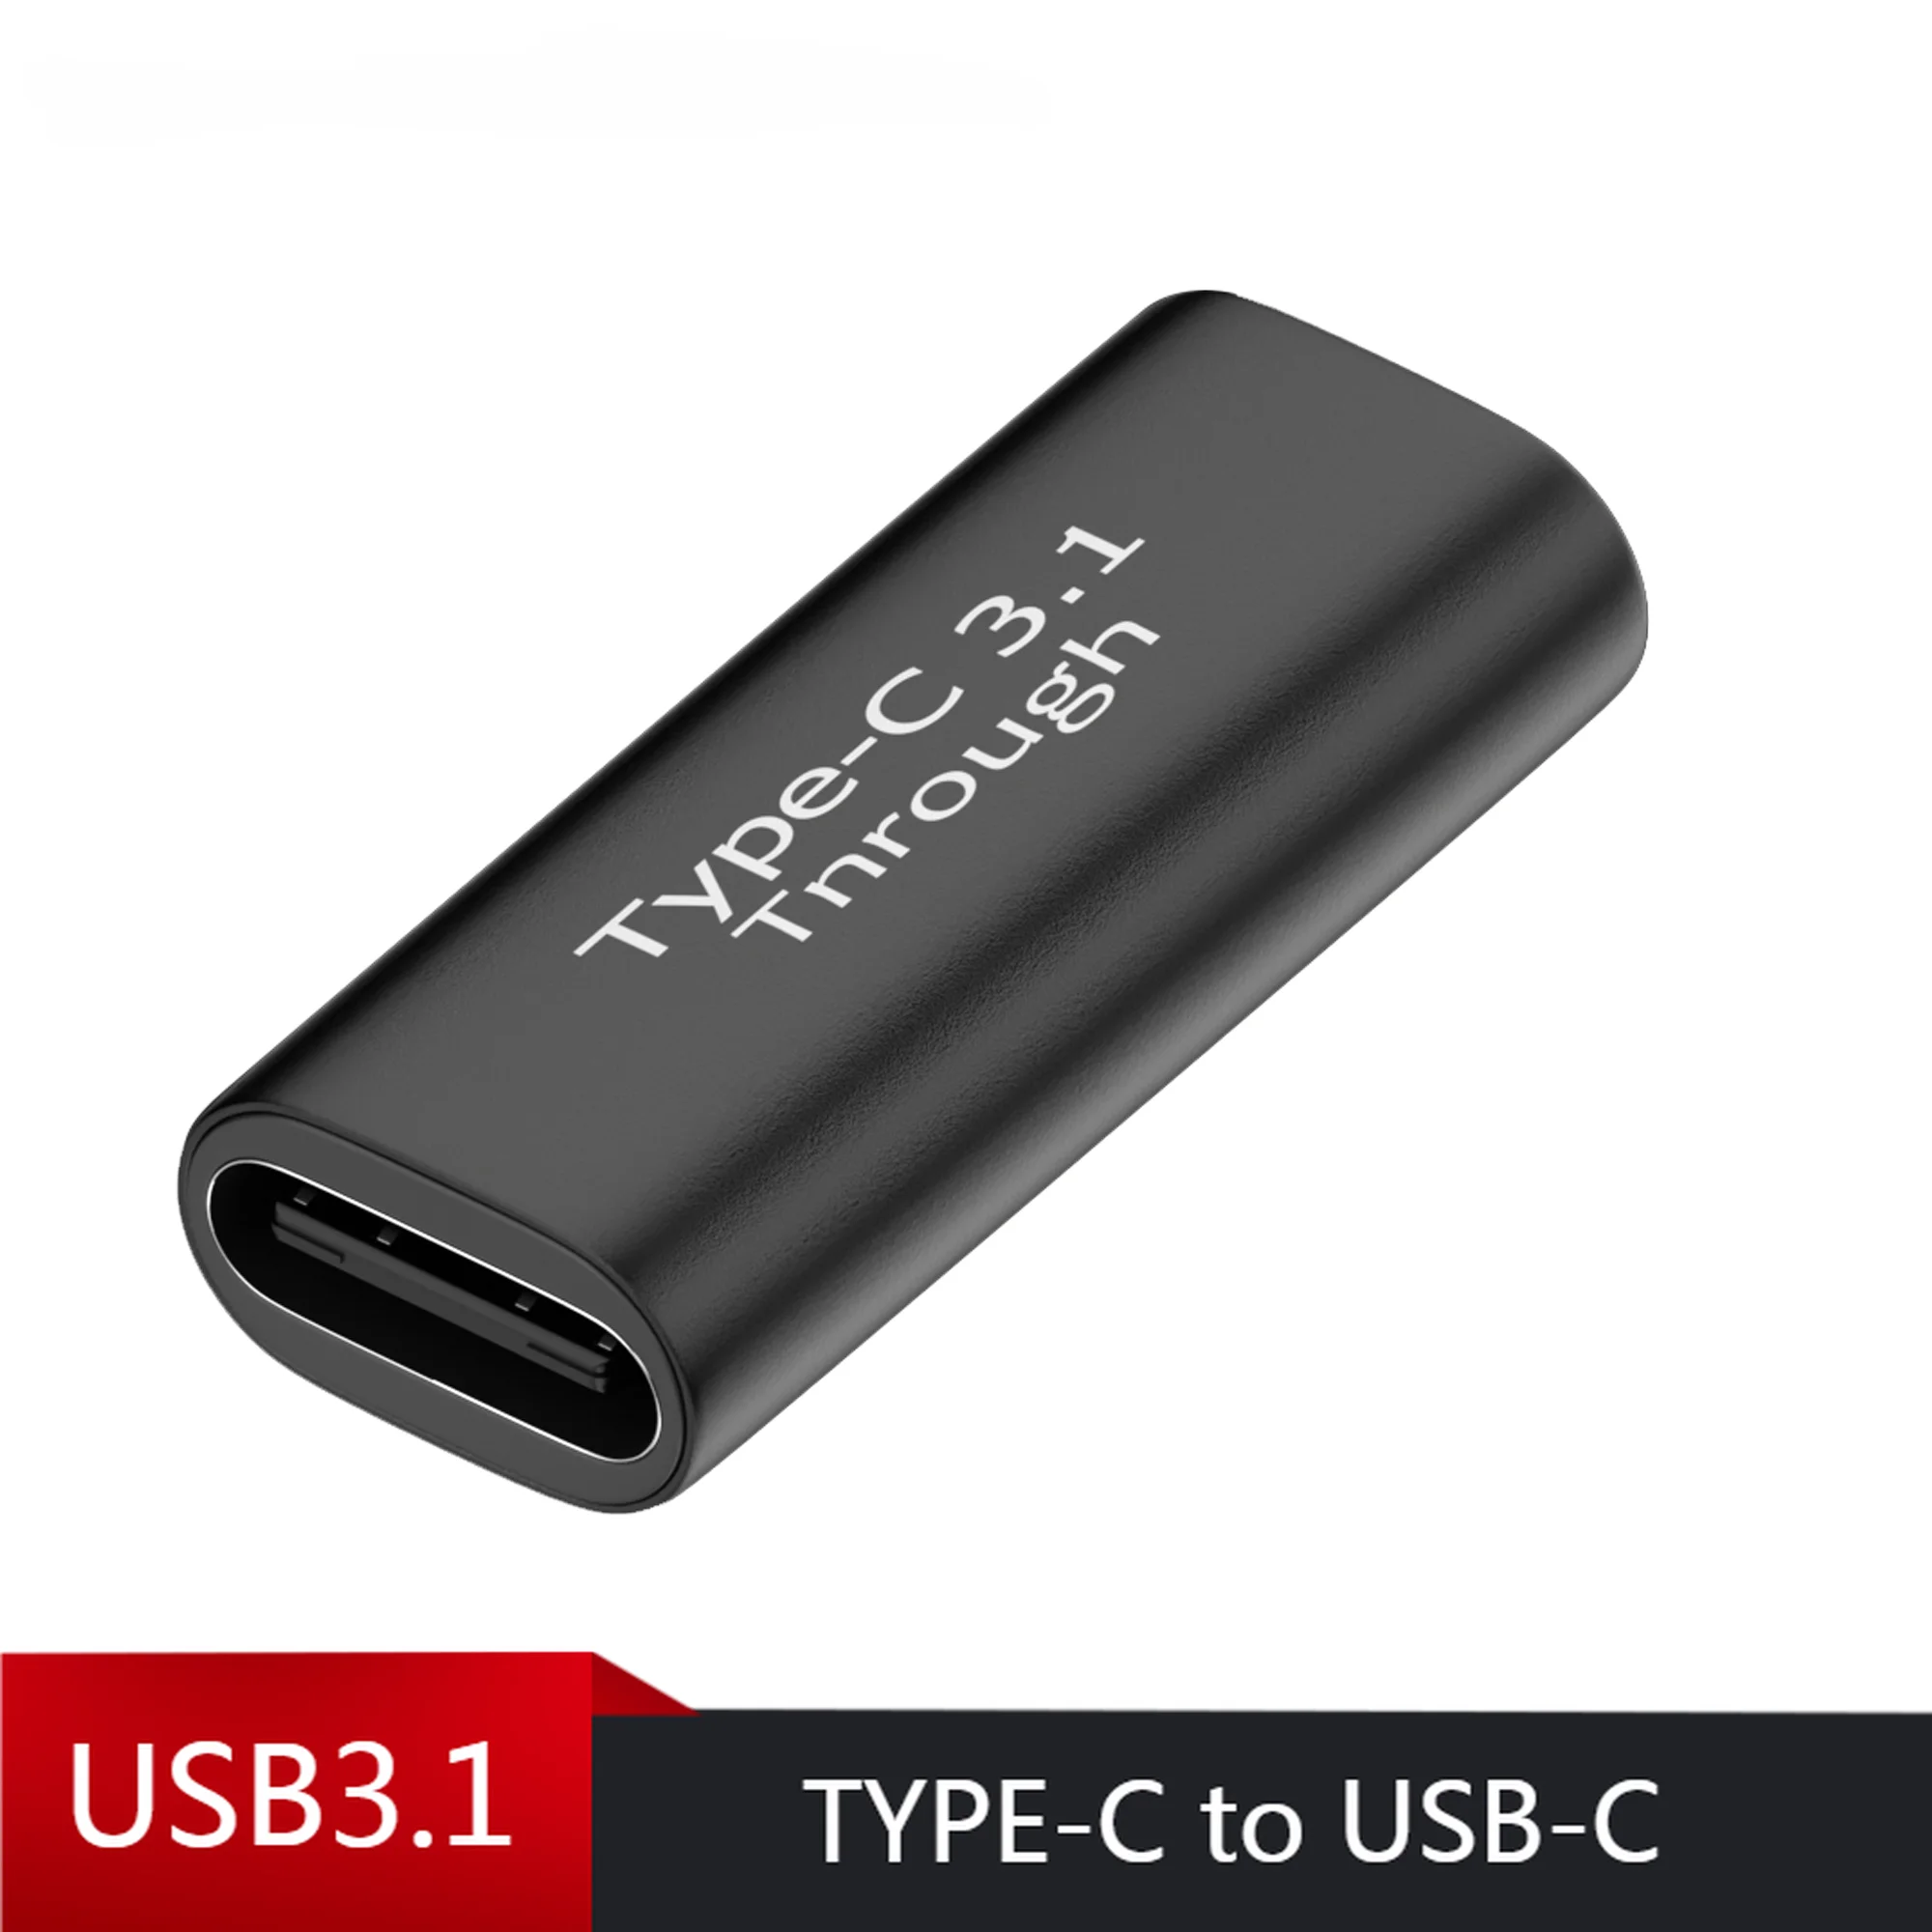 

USB Type C Adapter Female to Female Converter Portable USB-C Charge Data Sync Adapter Type-C Extension Cable for Phone Tablet